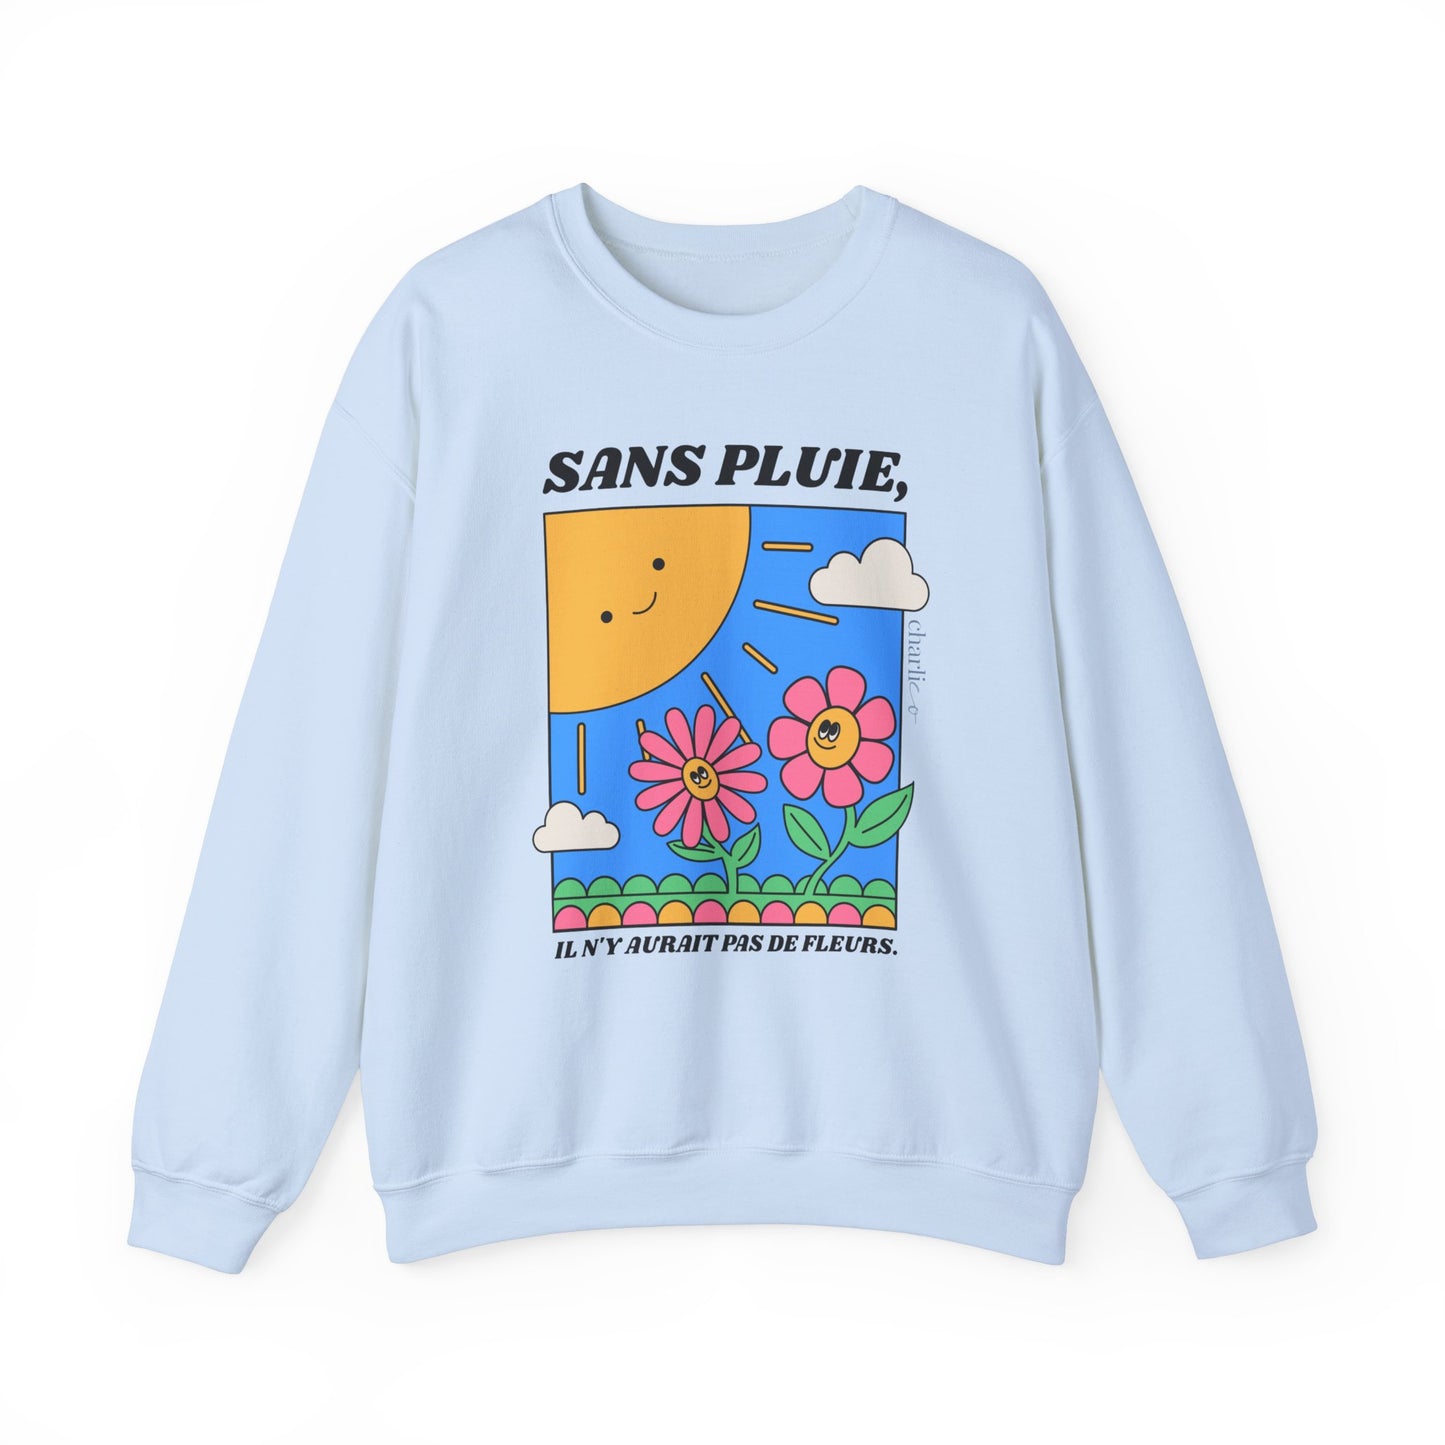 ''Without rain, there would be no flowers.'' crewneck sweatshirt for adults